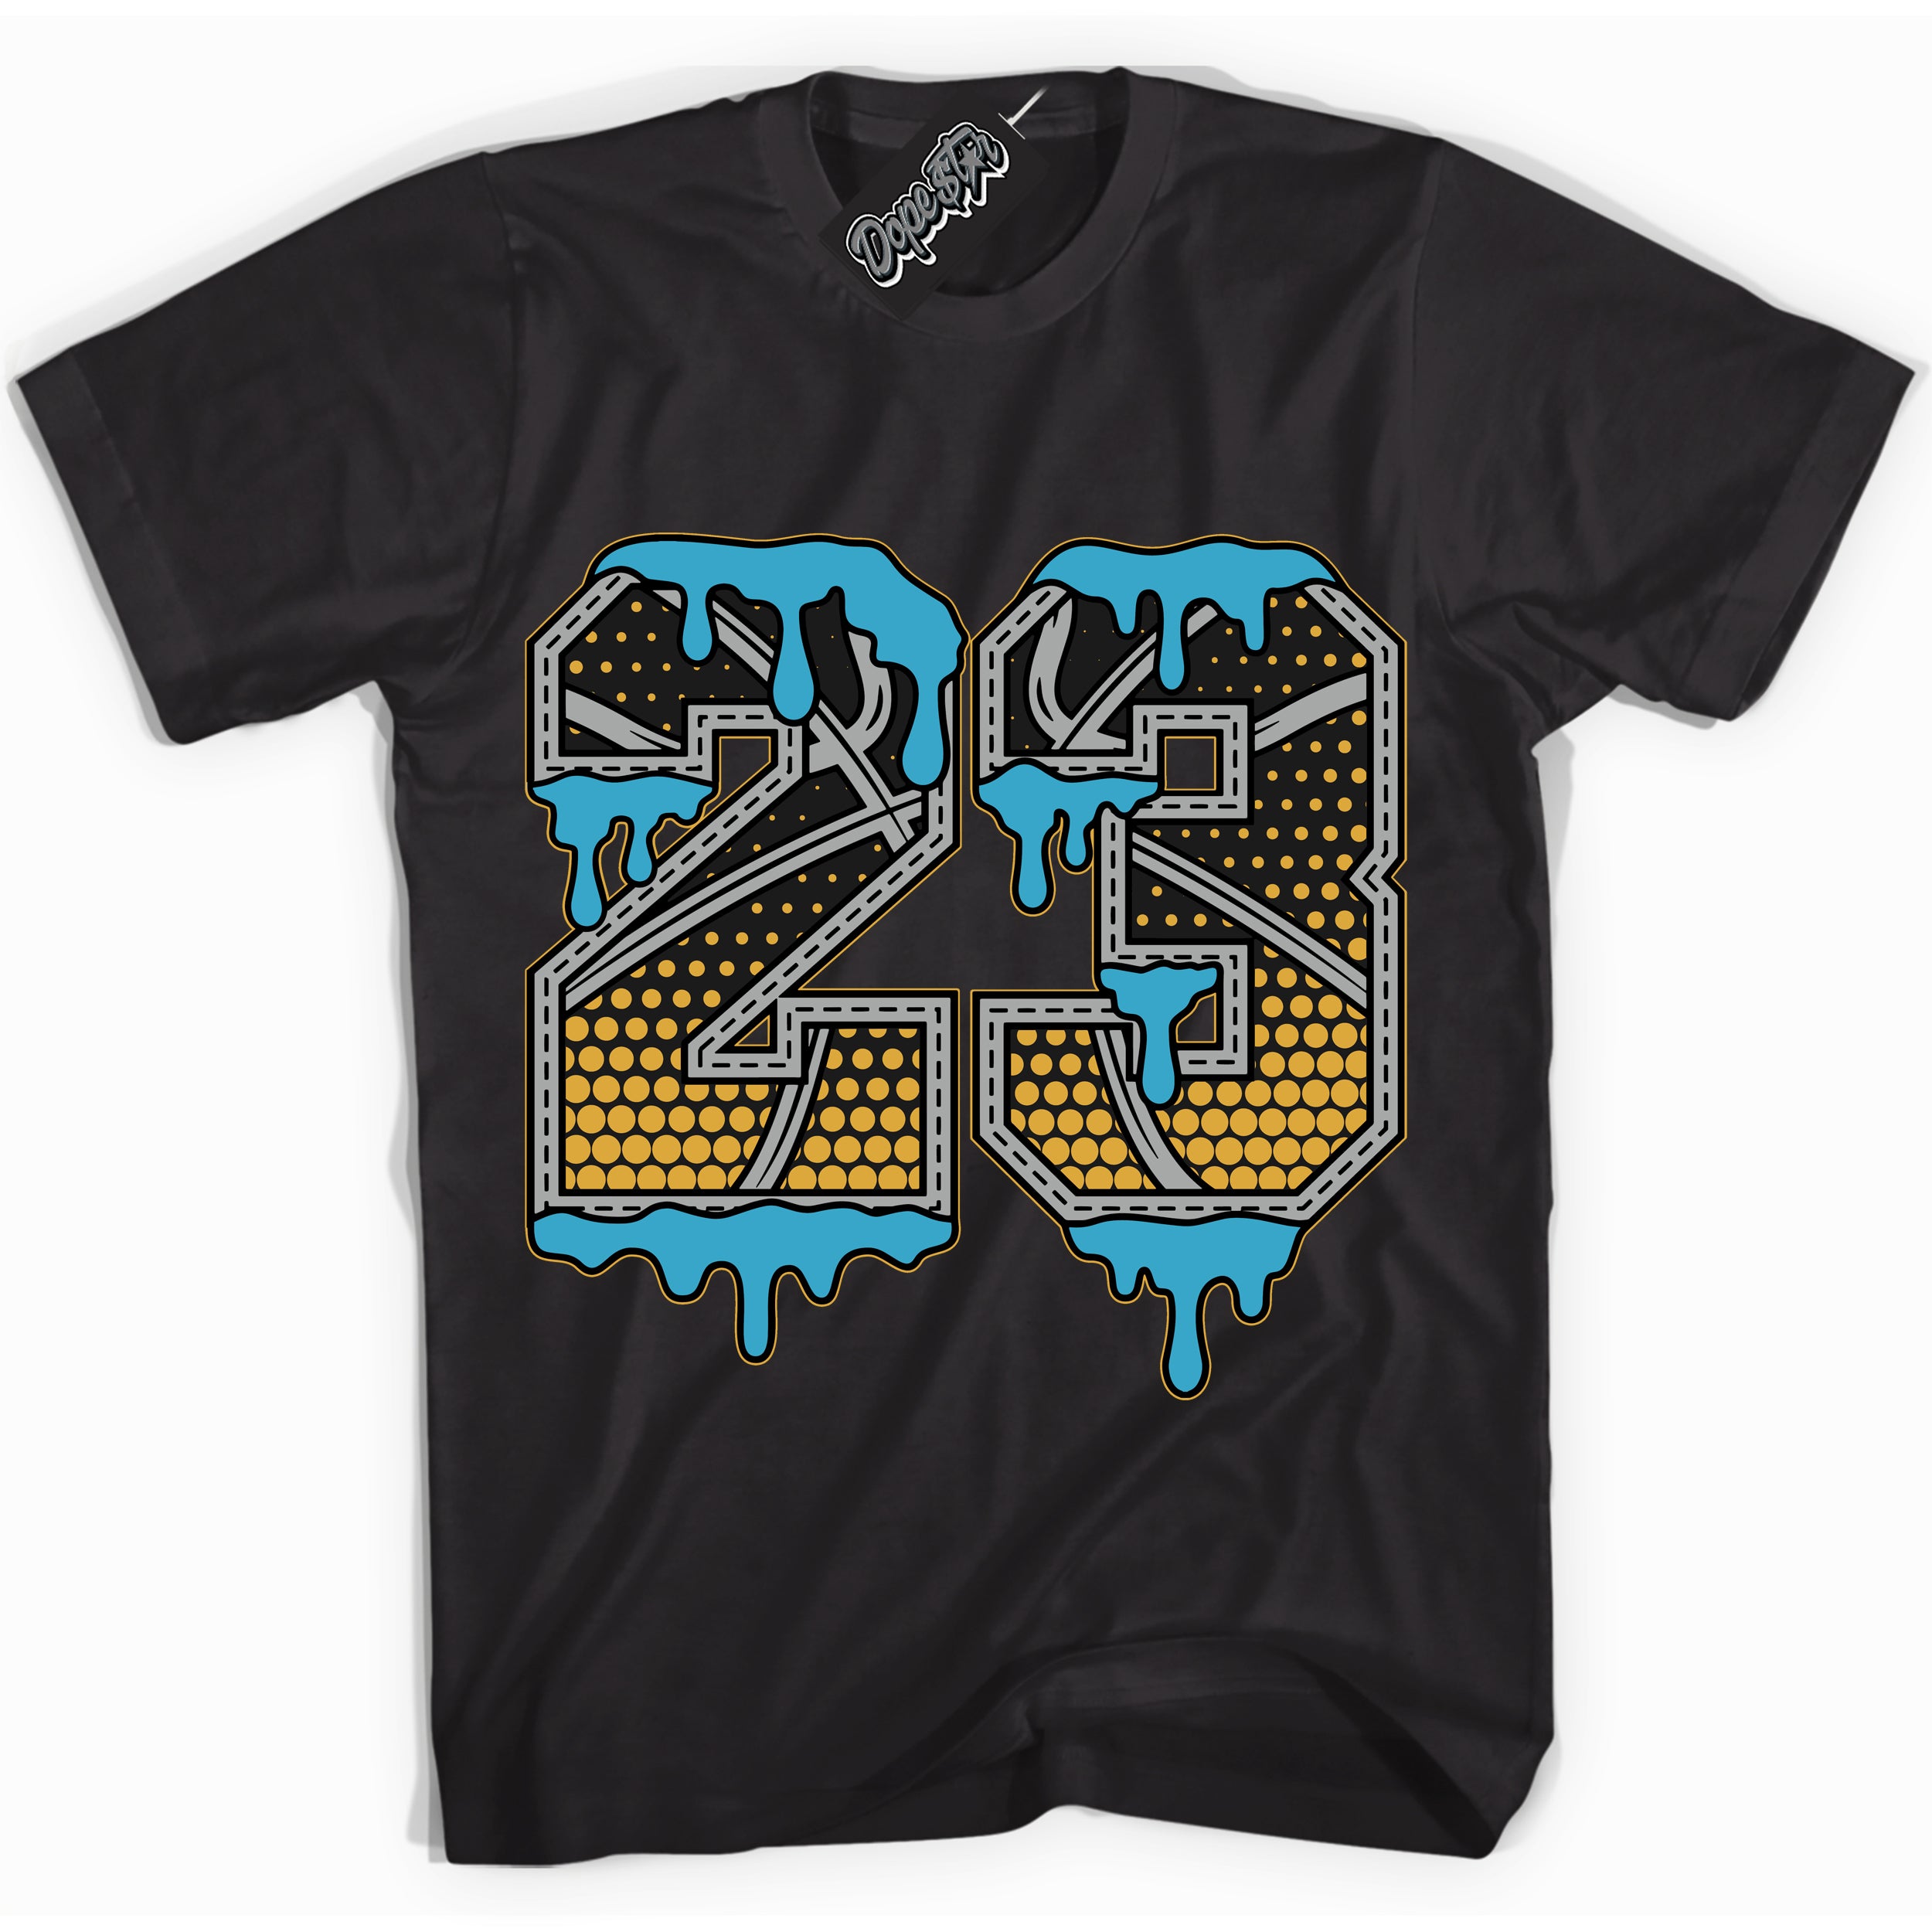 Cool Black Shirt with “ 23 Ball” design that perfectly matches Aqua 5s Sneakers.